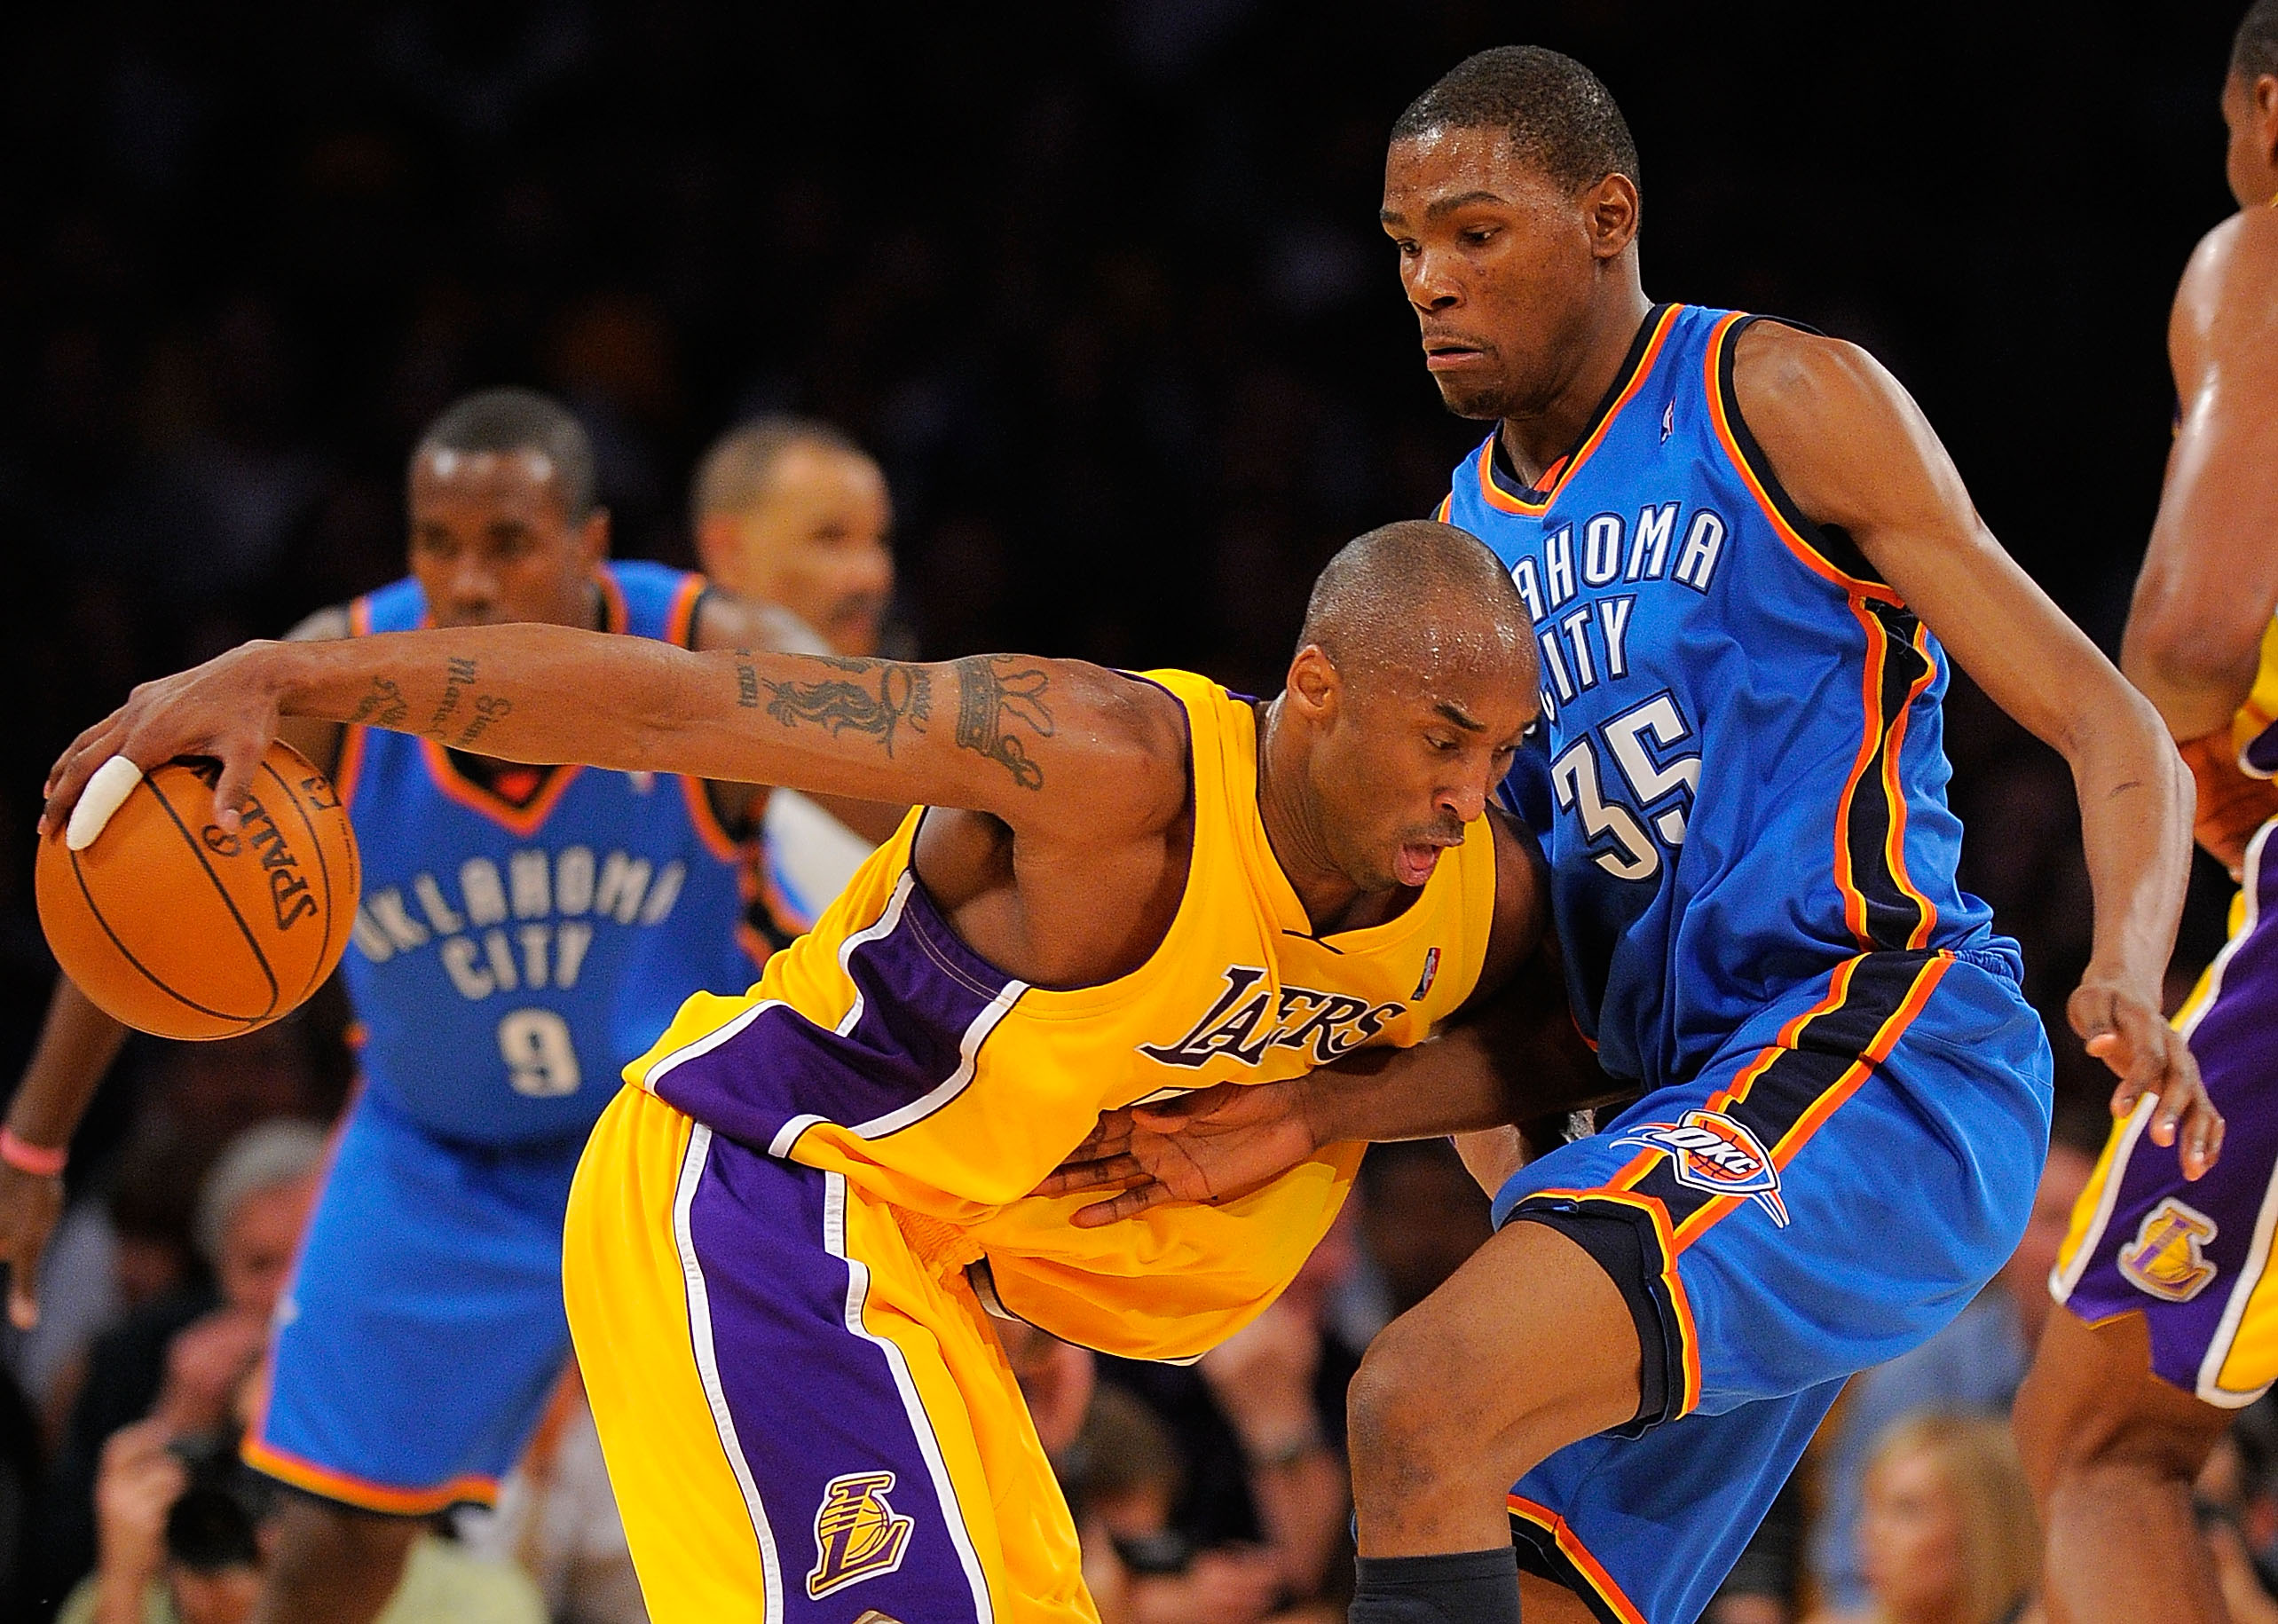 Los Angeles Lakers' Kobe Bryant bites his jersey against the Oklahoma  Thunder during the second half of Game 1 of their Western Conference  playoff series at Staples Center in Los Ageles on April 18, 2010. The  Lakers defeated the Thunder 87-79. UPI